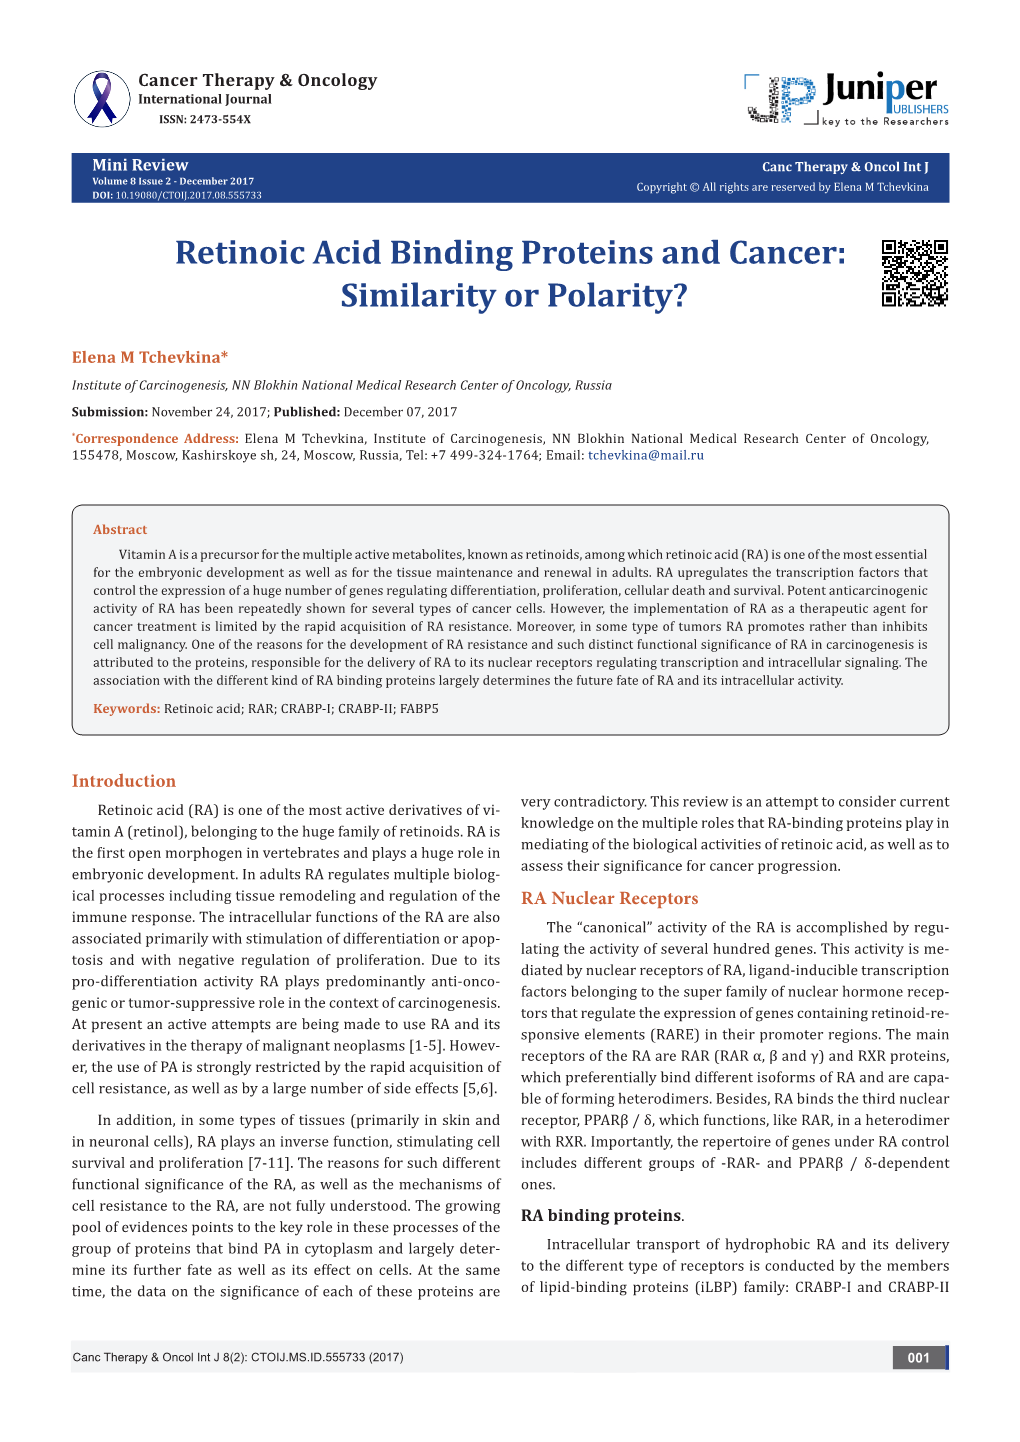 Retinoic Acid Binding Proteins and Cancer: Similarity Or Polarity?